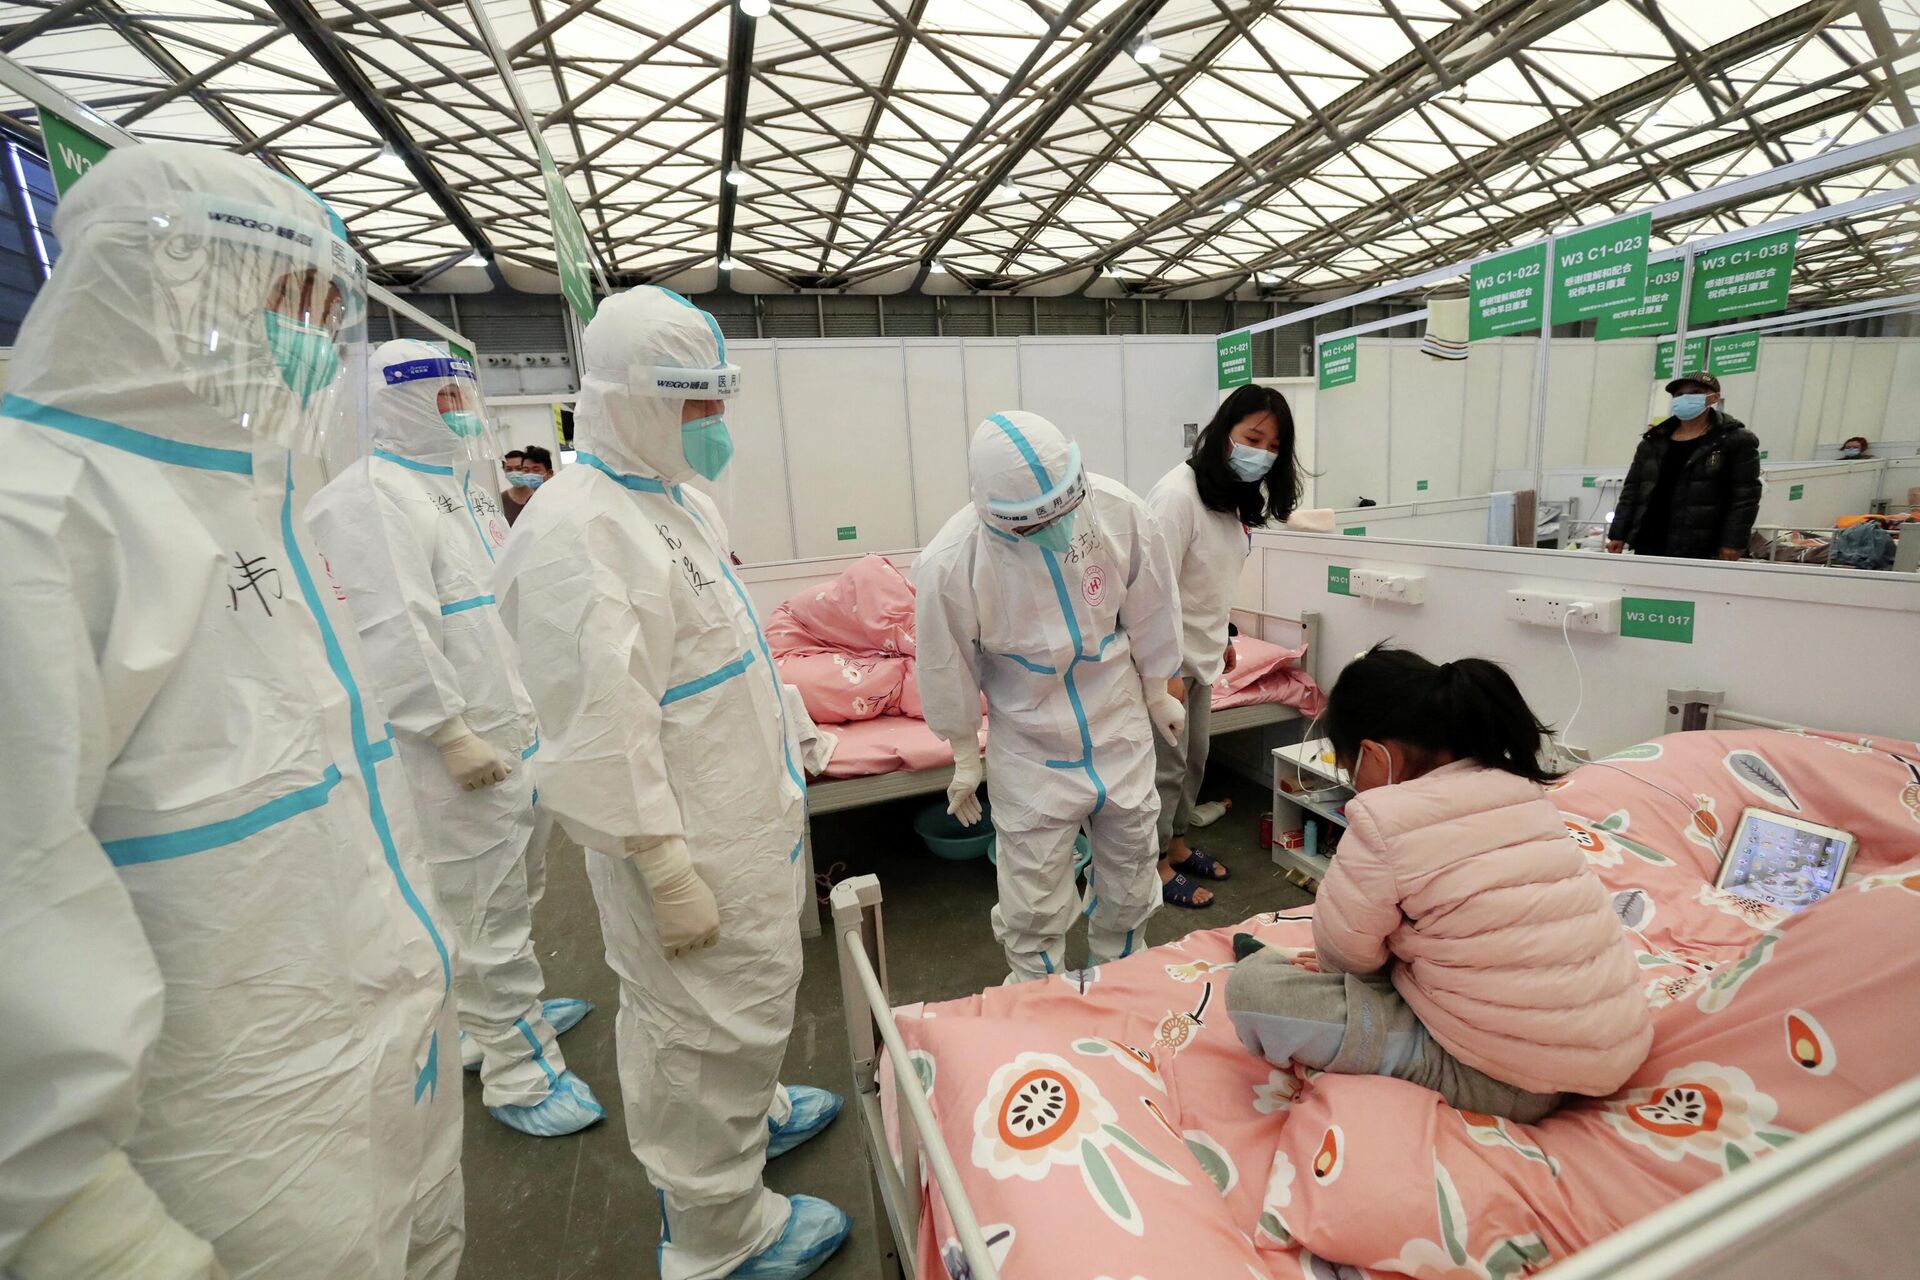 Medical workers in protective suits check a child patient as they conduct ward rounds at Shanghai New International Exhibition Hall, which has been turned into a makeshift hospital for the coronavirus disease (COVID-19), in Shanghai, China April 9, 2022. Picture taken April 9, 2022. China Daily via REUTERS   ATTENTION EDITORS - THIS IMAGE WAS PROVIDED BY A THIRD PARTY. CHINA OUT. - Sputnik International, 1920, 12.04.2022